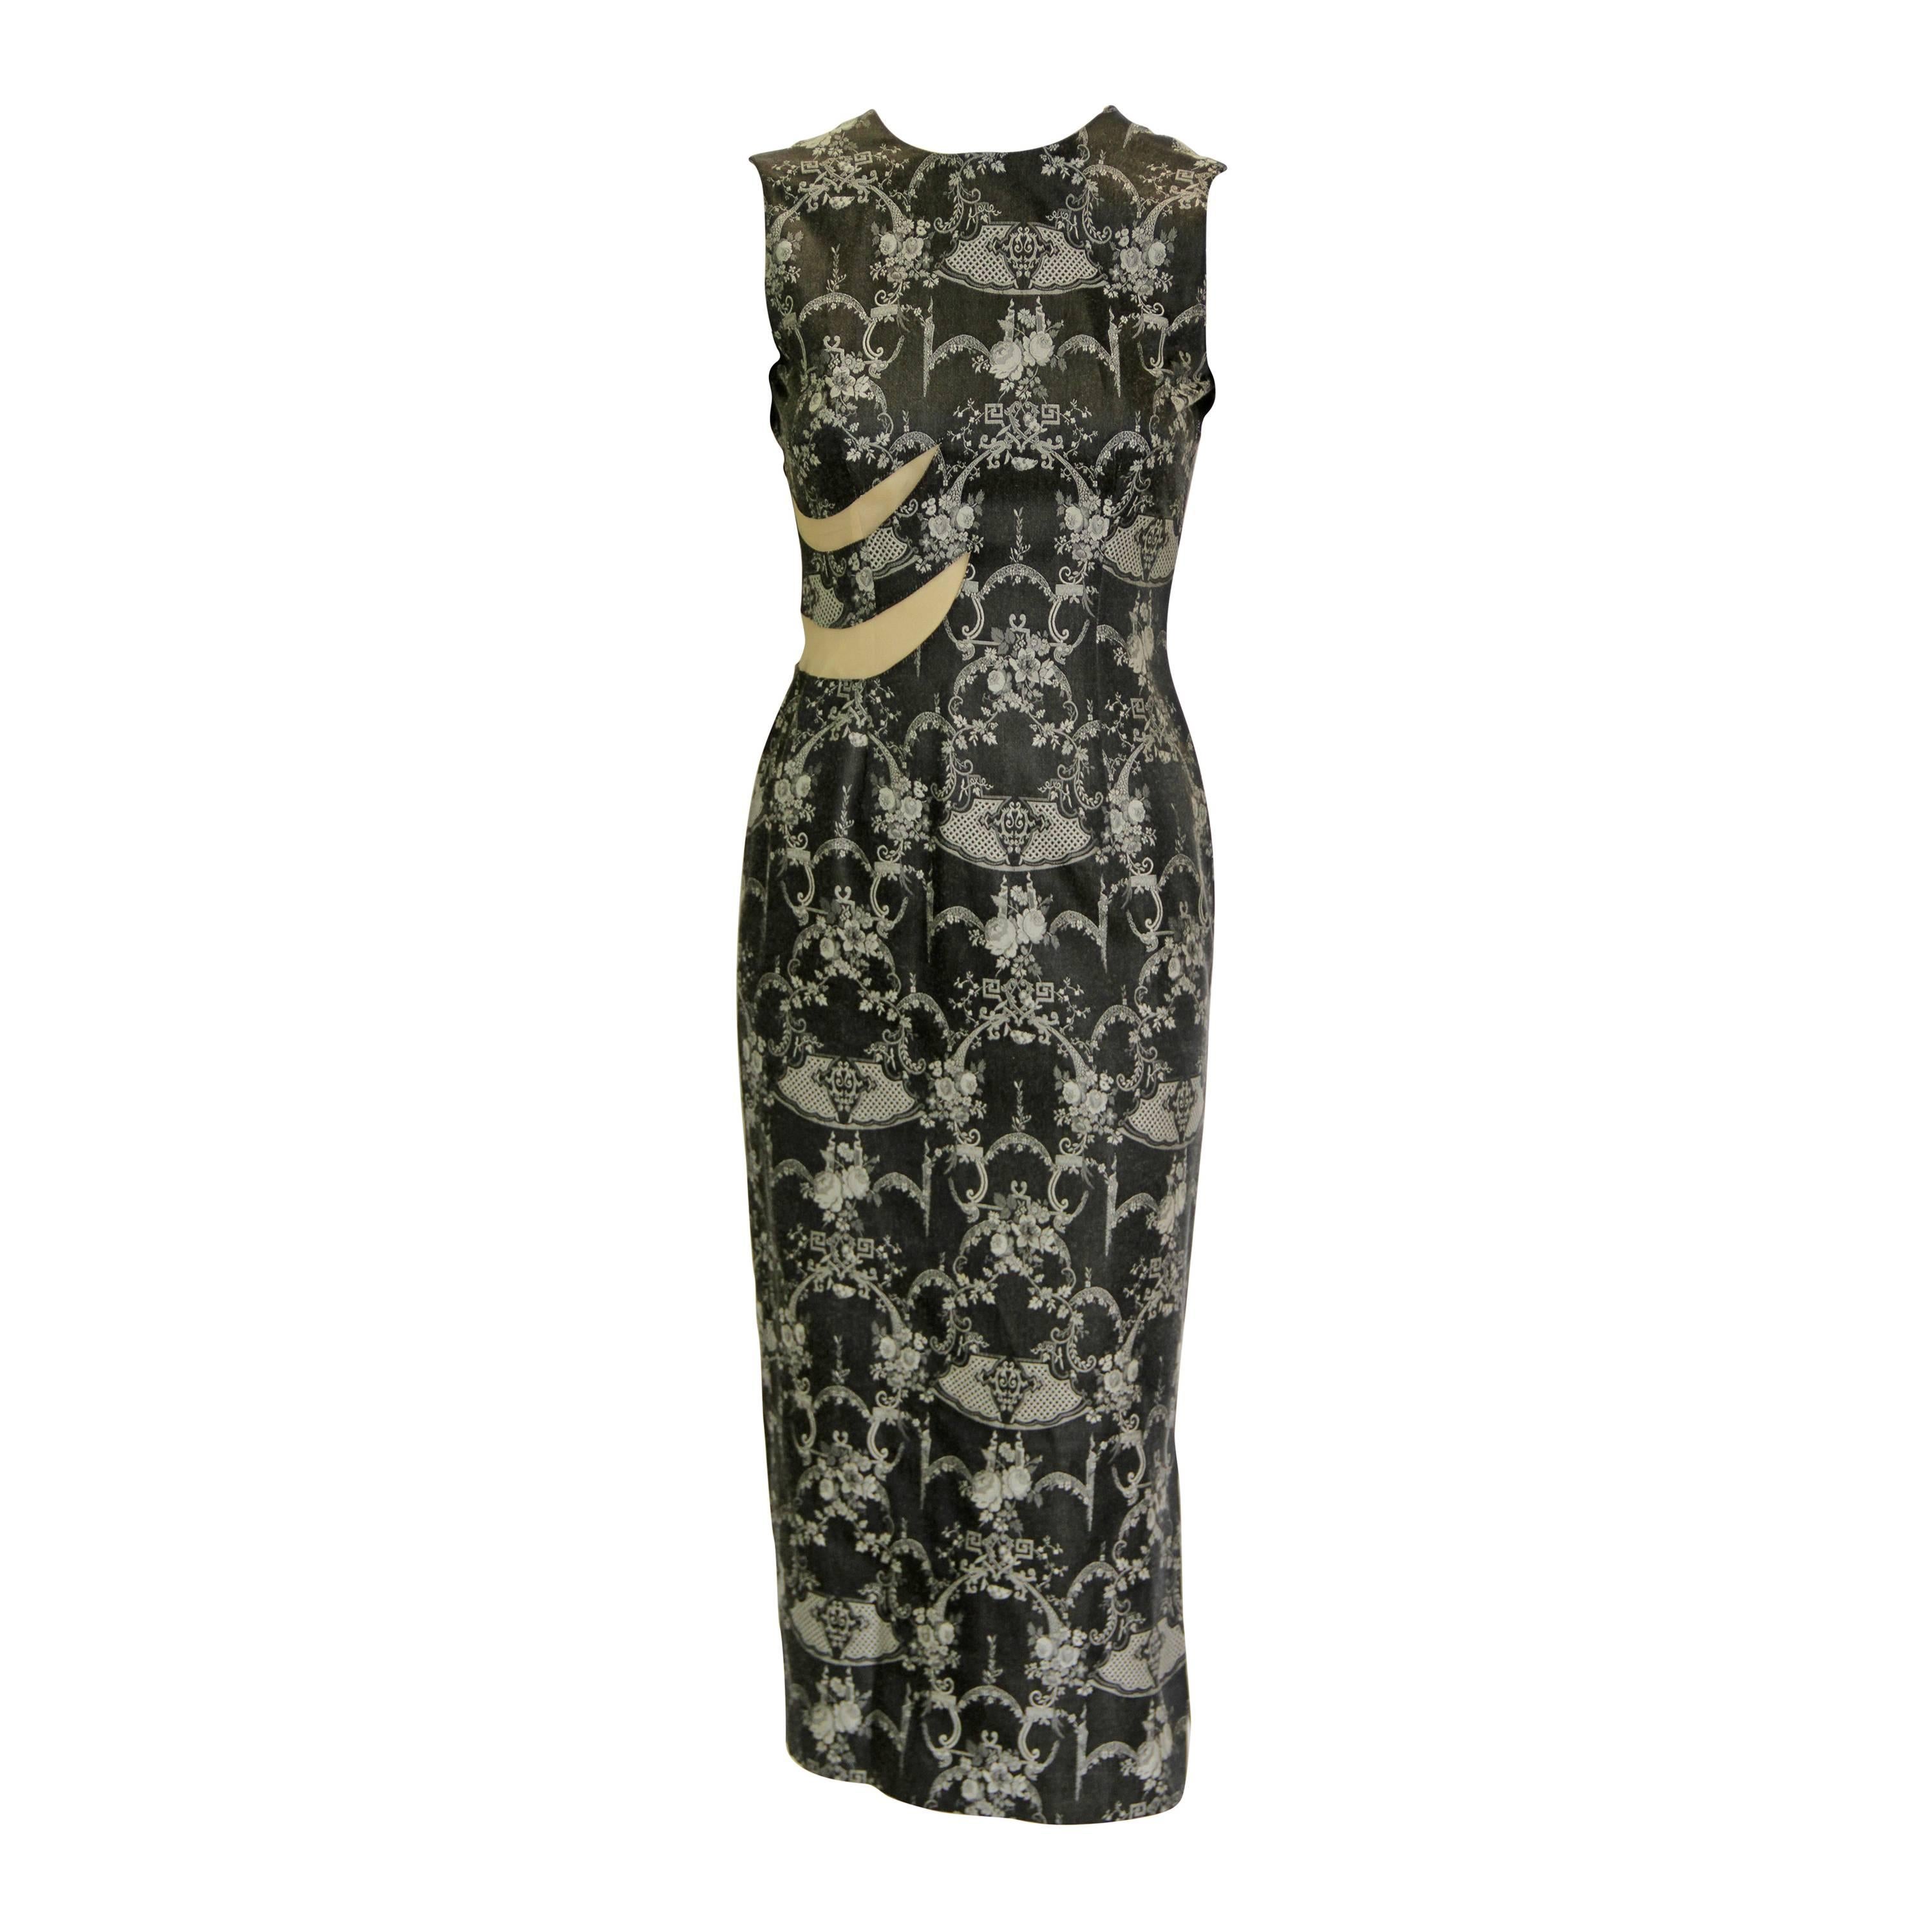 Alexander McQueen Tapestry Printed Cut-Out Dress 1996 For Sale